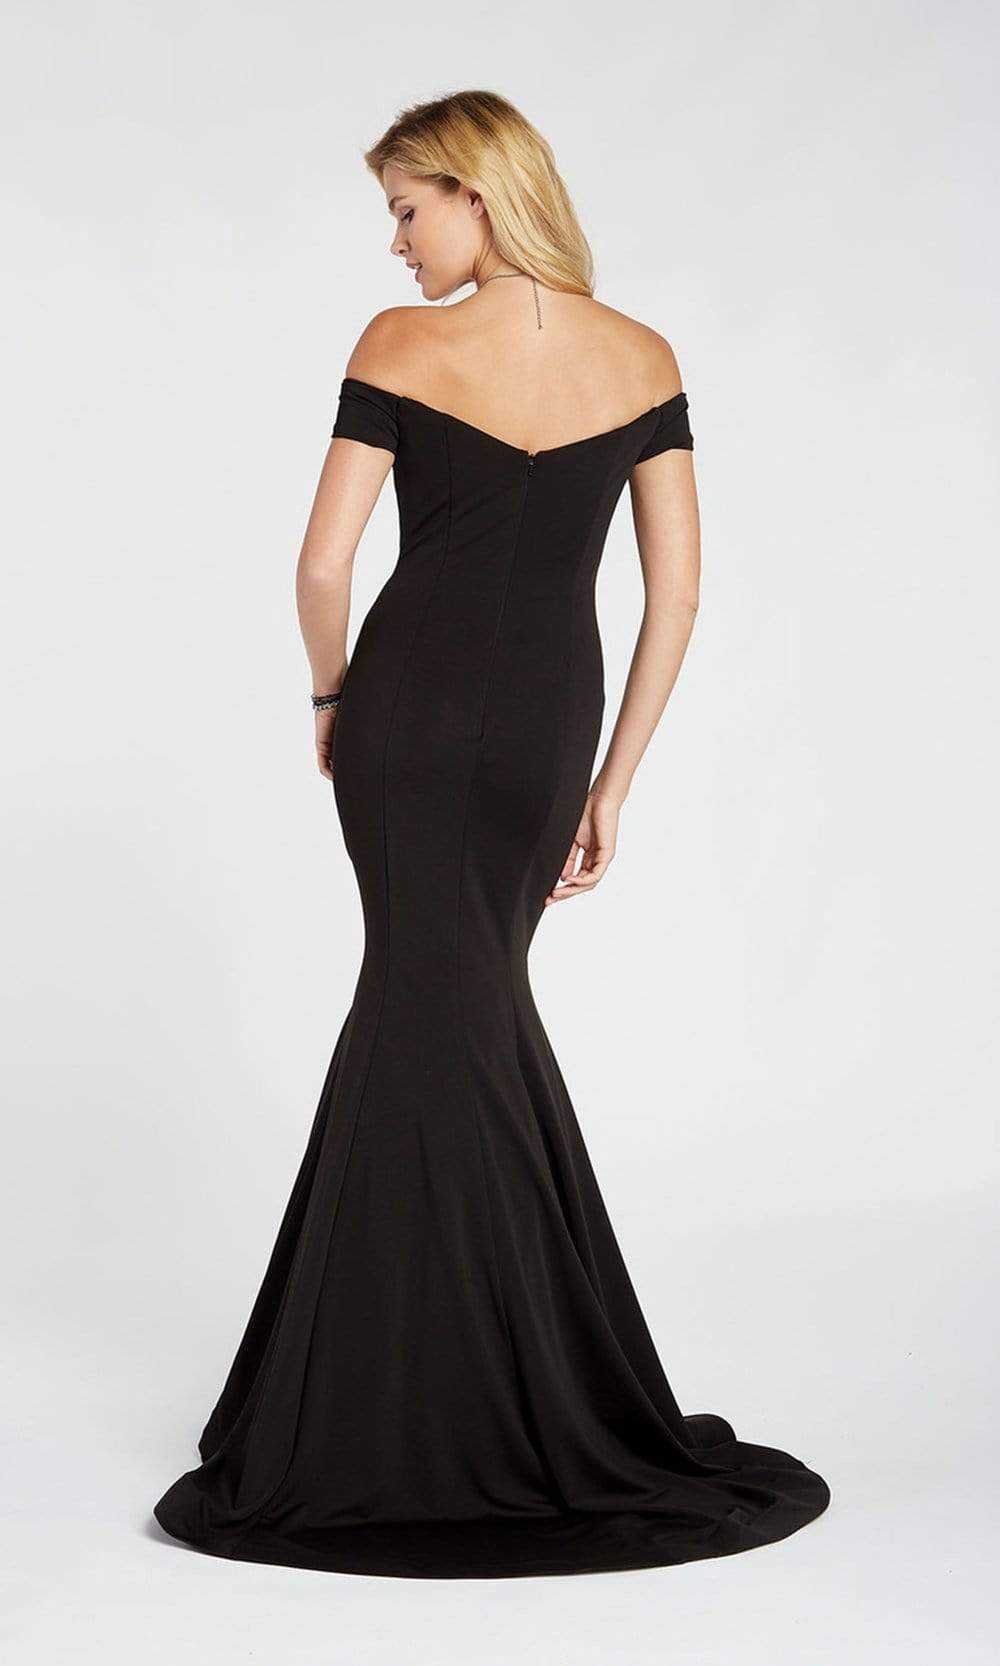 Alyce Paris, Alyce Paris - Off Shoulder Jersey Mermaid Evening Gown 60294 - 2 pcs Navy in Size 4 and 10 and 1 pc Black in Size 8 Available